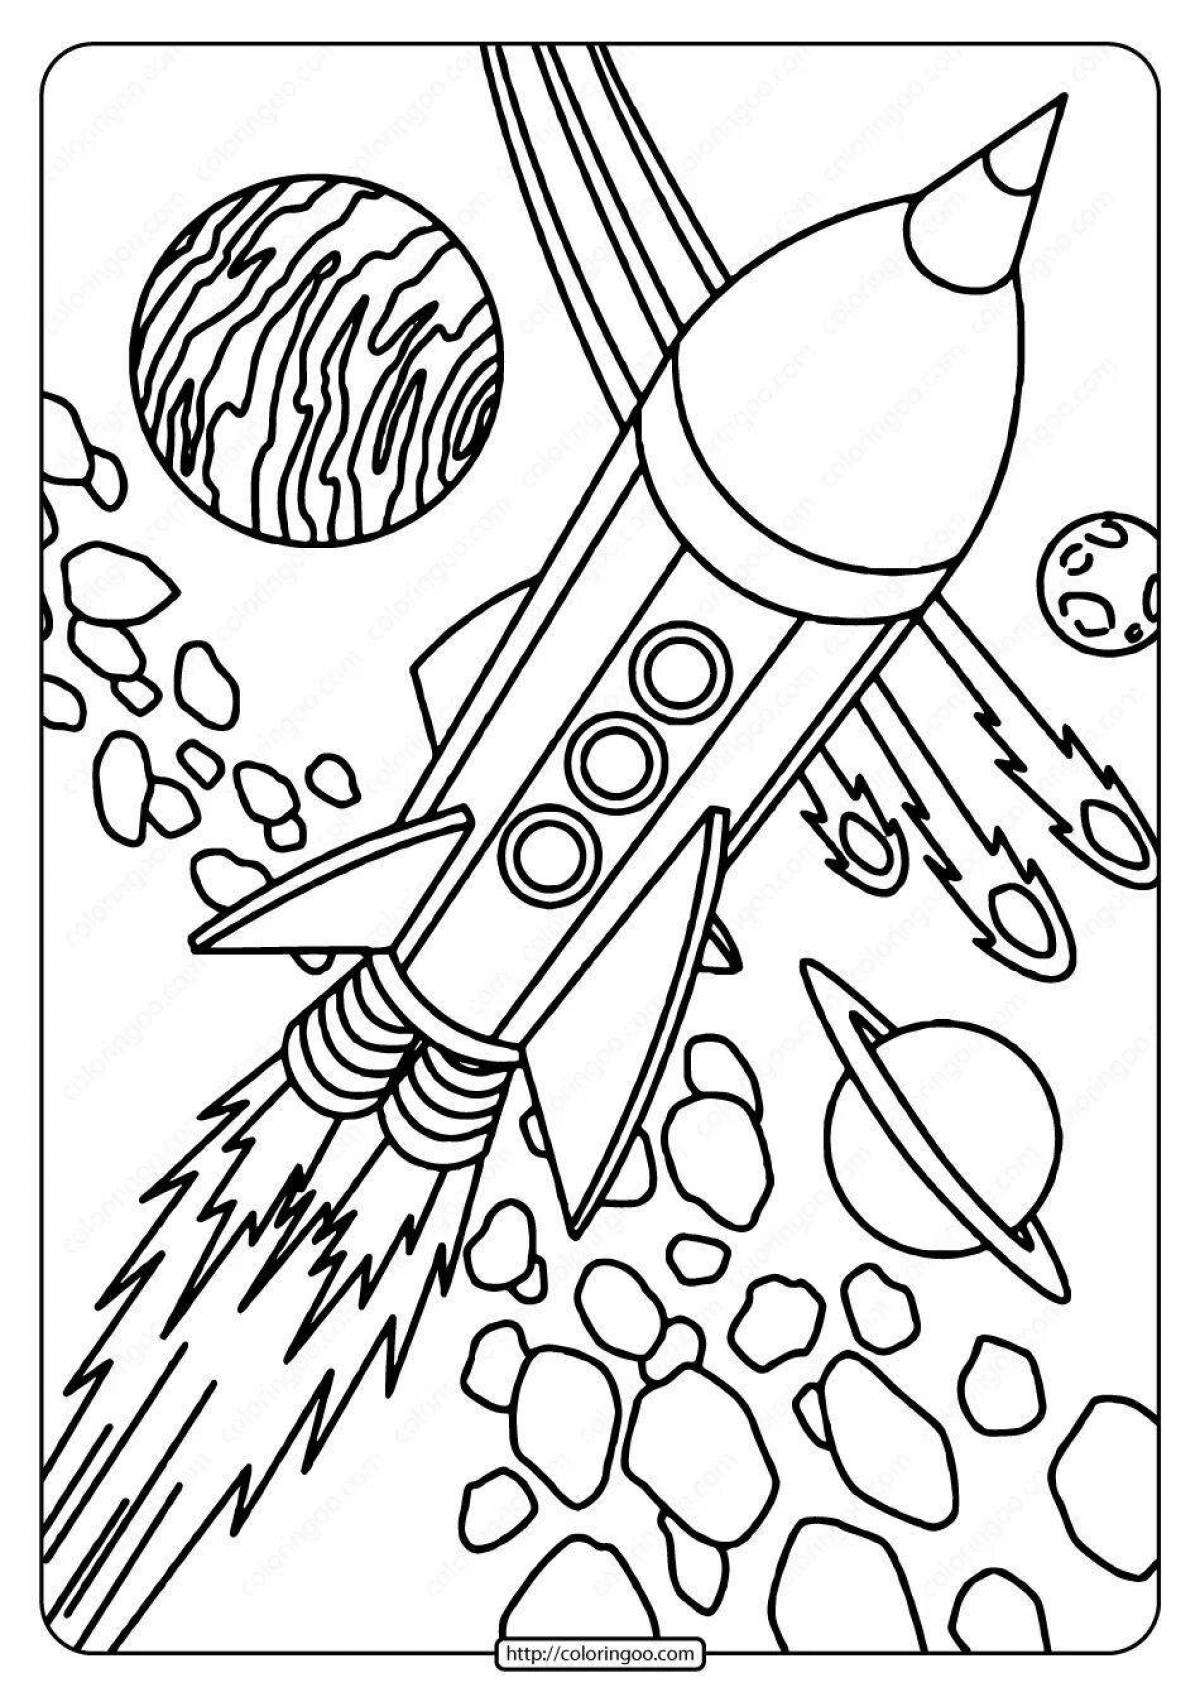 Rocket bright coloring book for 4-5 year olds